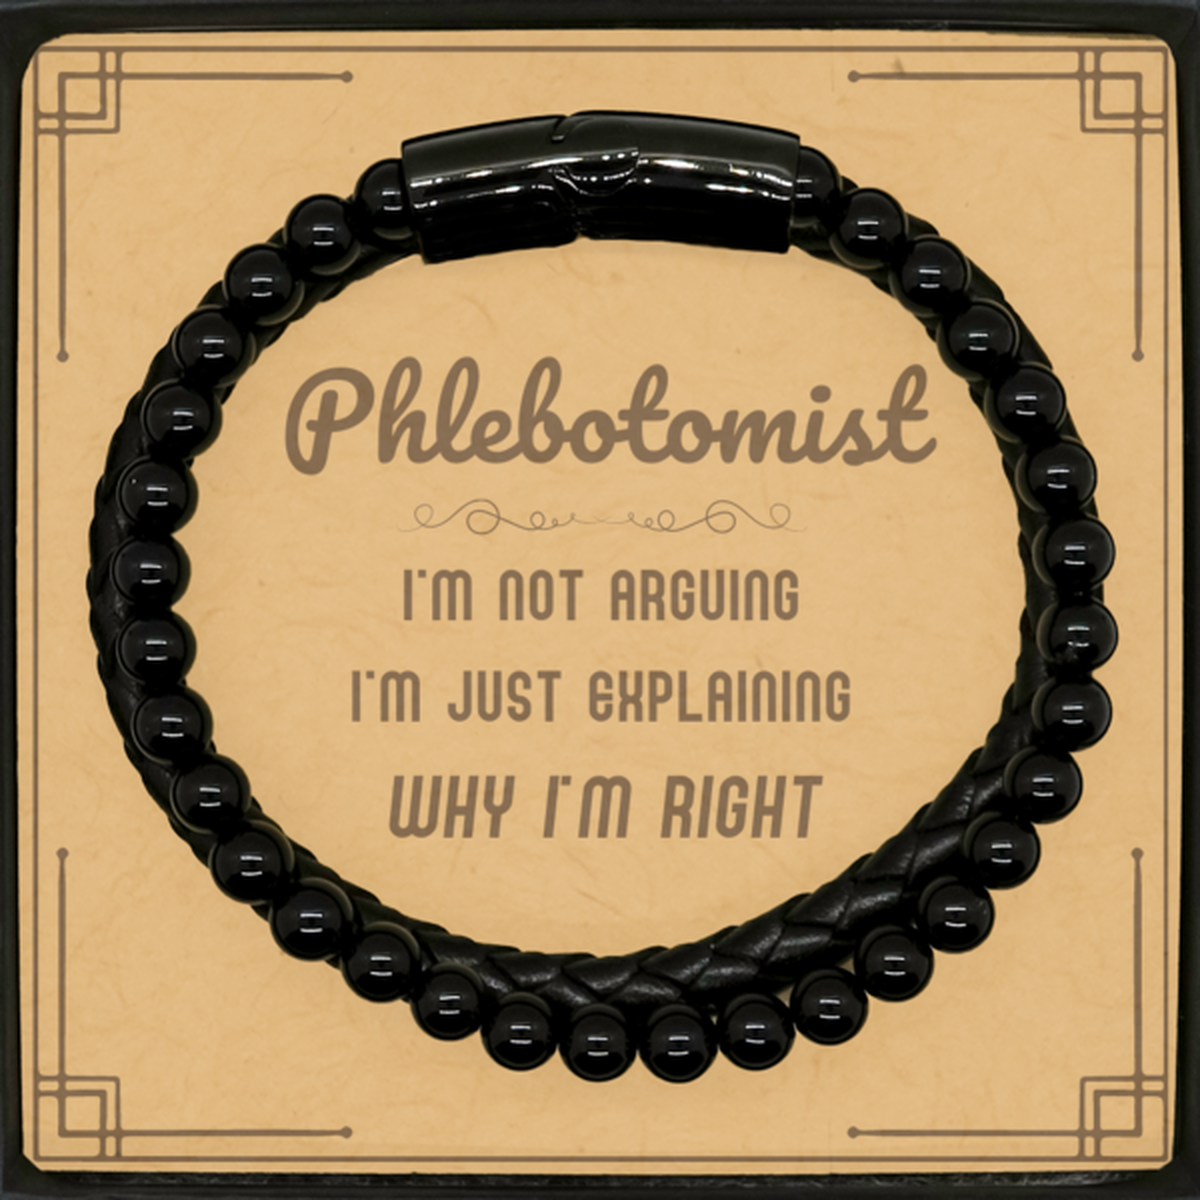 Phlebotomist I'm not Arguing. I'm Just Explaining Why I'm RIGHT Stone Leather Bracelets, Funny Saying Quote Phlebotomist Gifts For Phlebotomist Message Card Graduation Birthday Christmas Gifts for Men Women Coworker